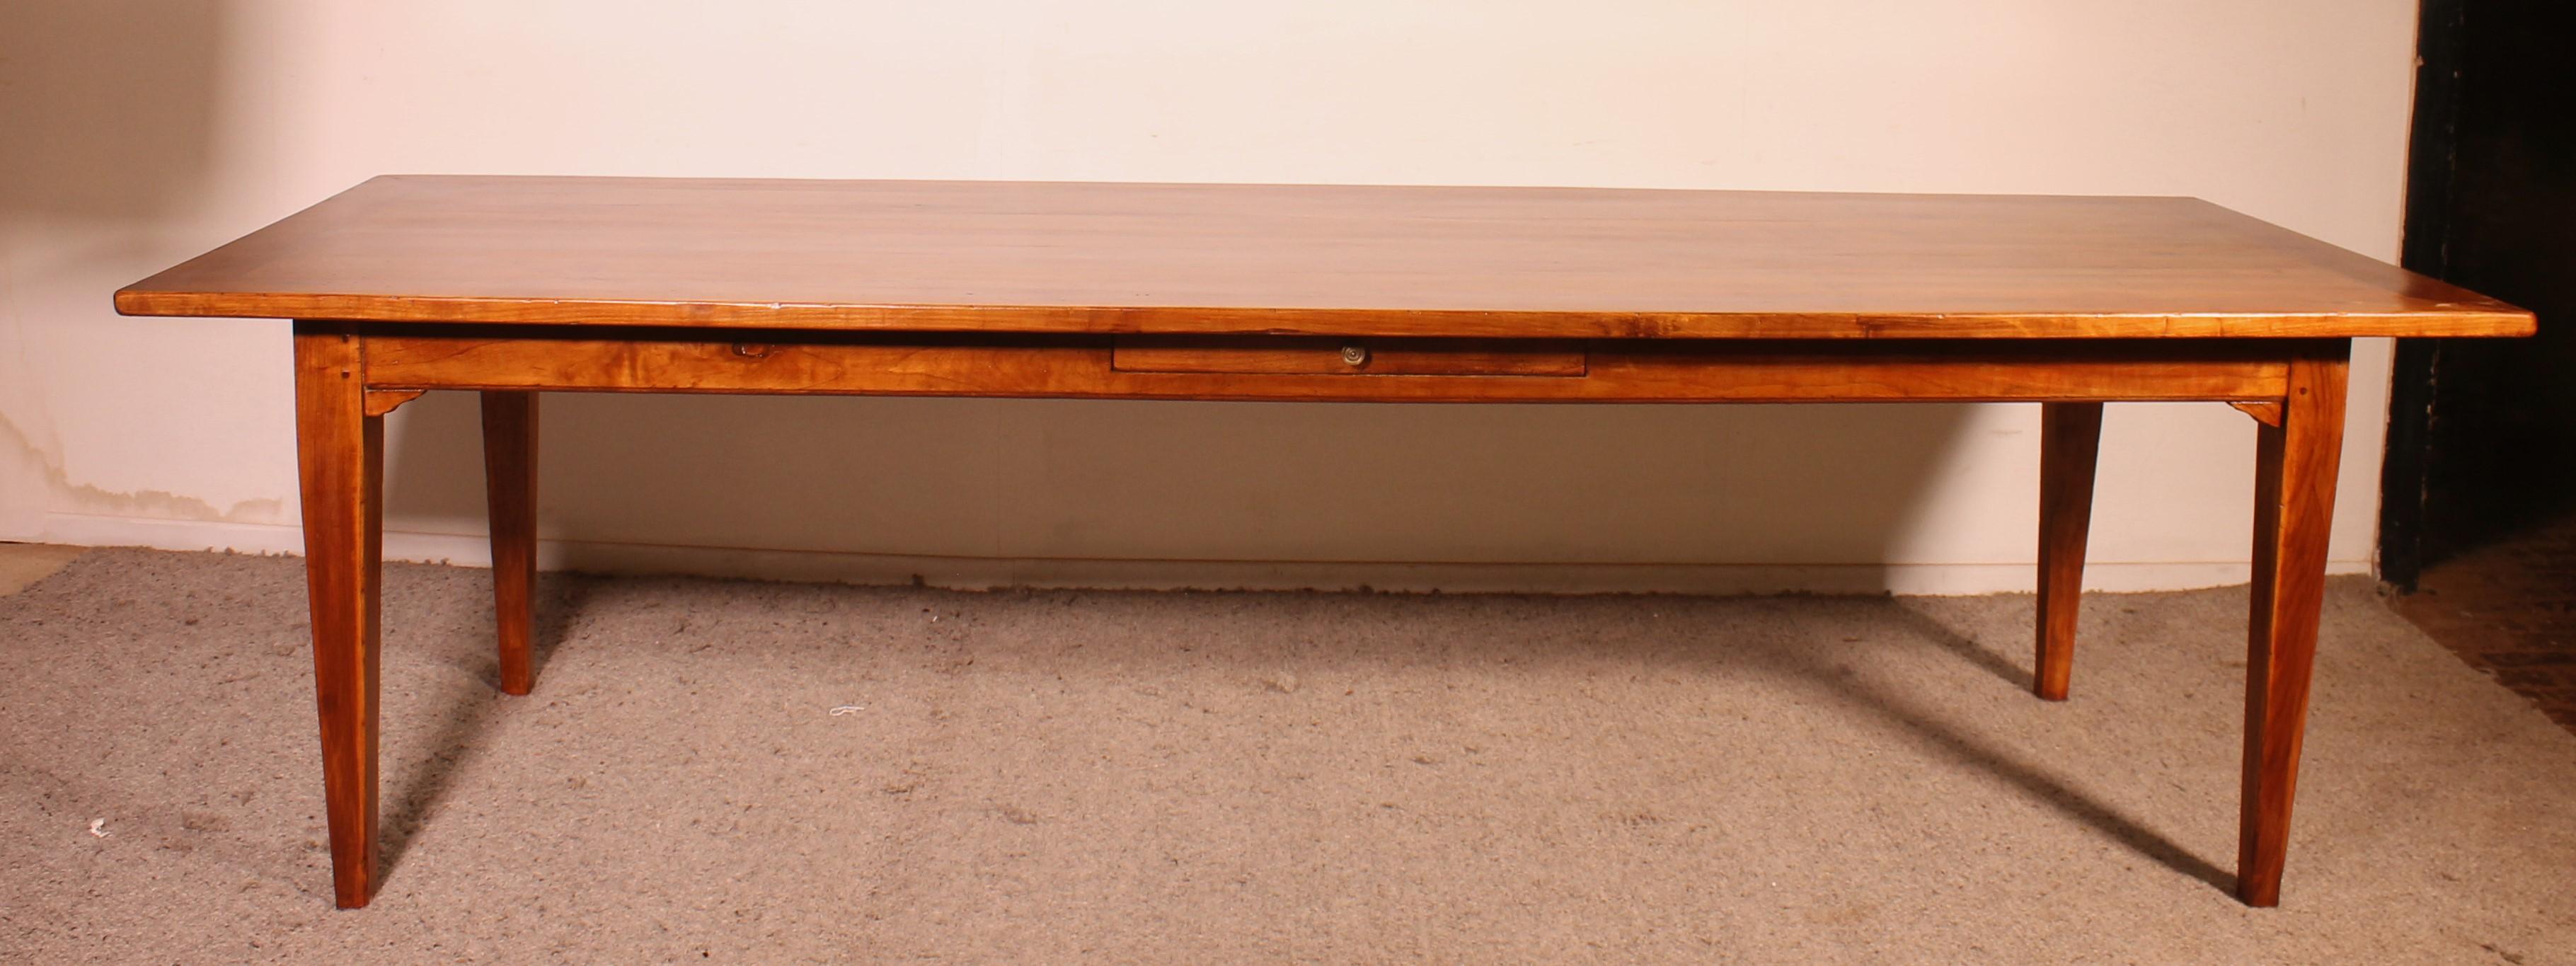 Aesthetic Movement Large 19th Century Cherry Wood Refectory Table With A Width Of 100cm For Sale